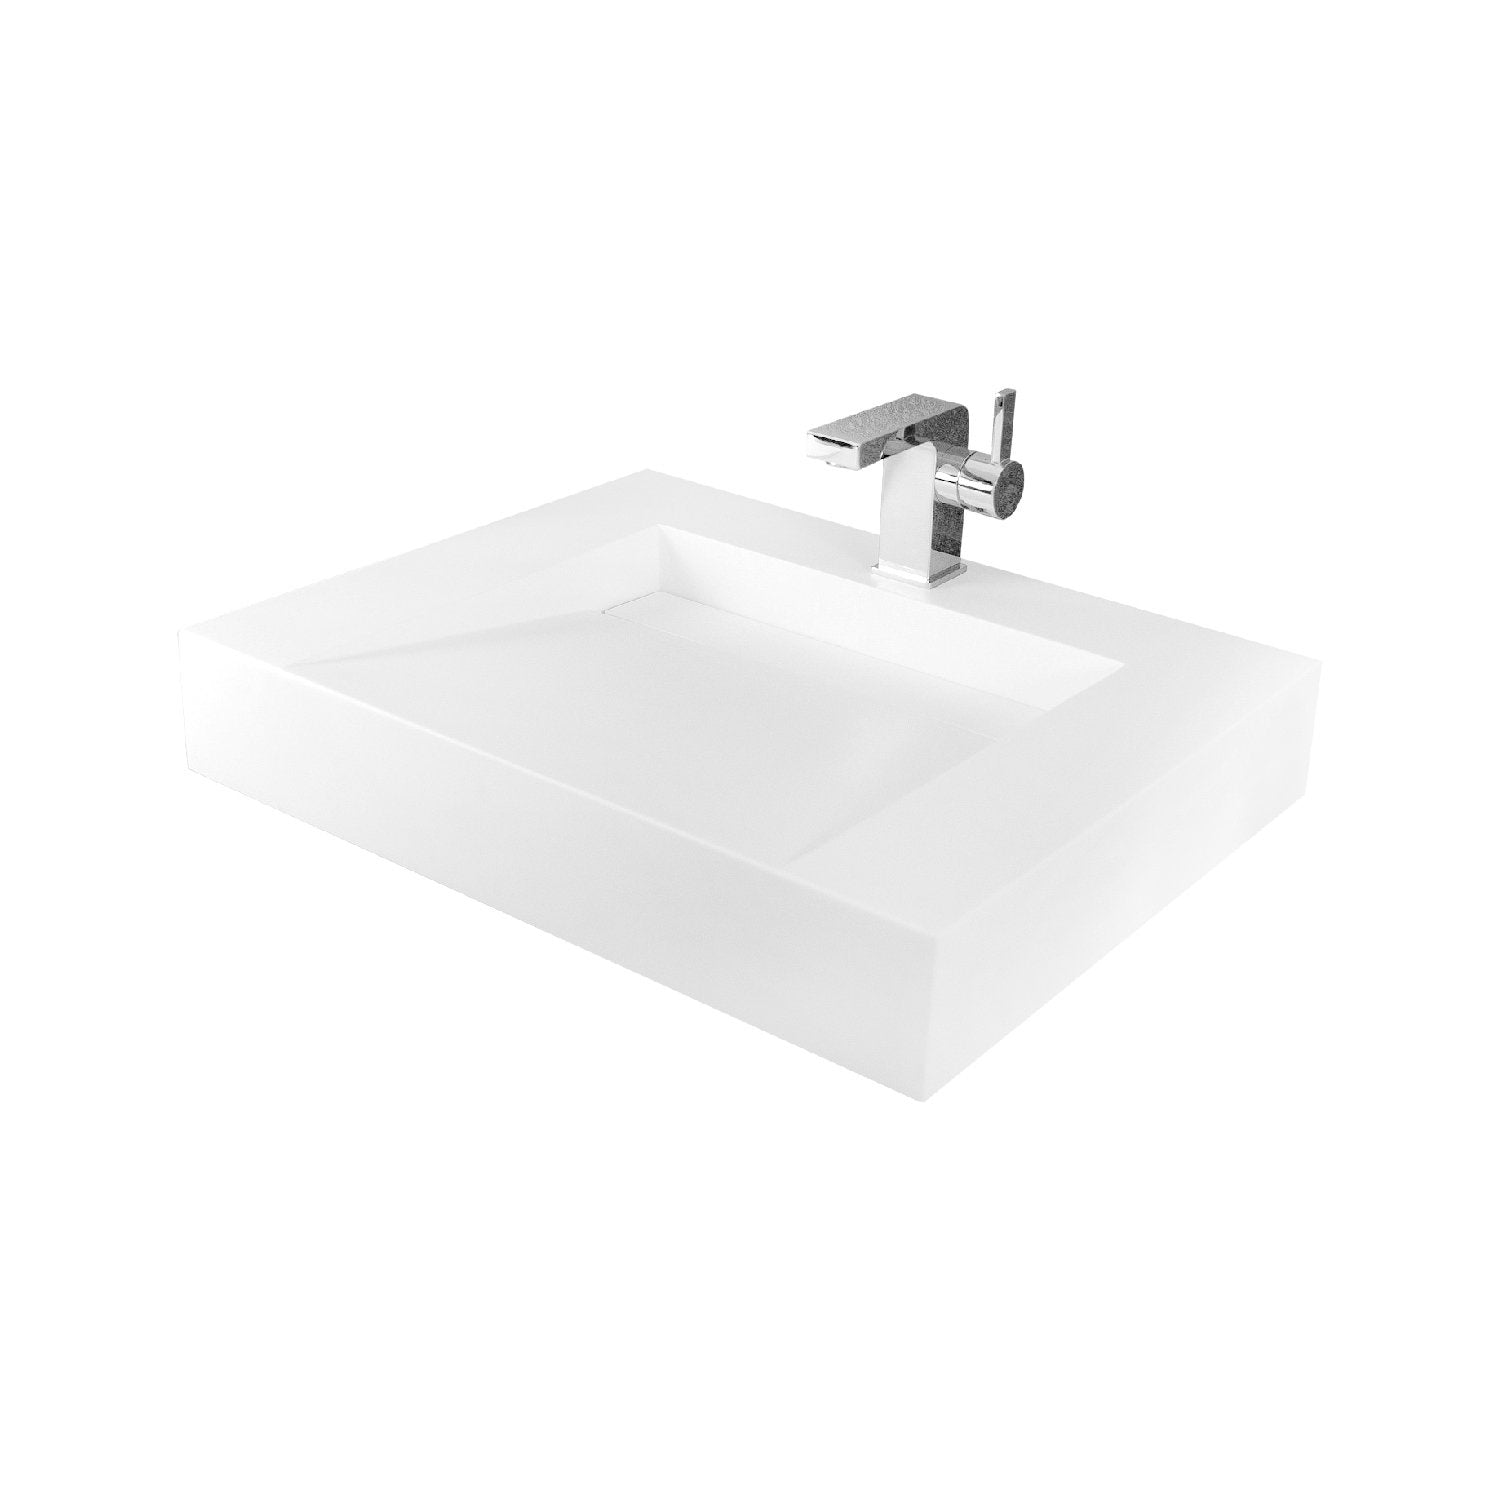 DAX Solid Surface Rectangle Single Bowl Wall Mount Bathroom Sink, White Matte Finish,  23-3/5 x 18-1/2 x 4 Inches (DAX-AB-1379)